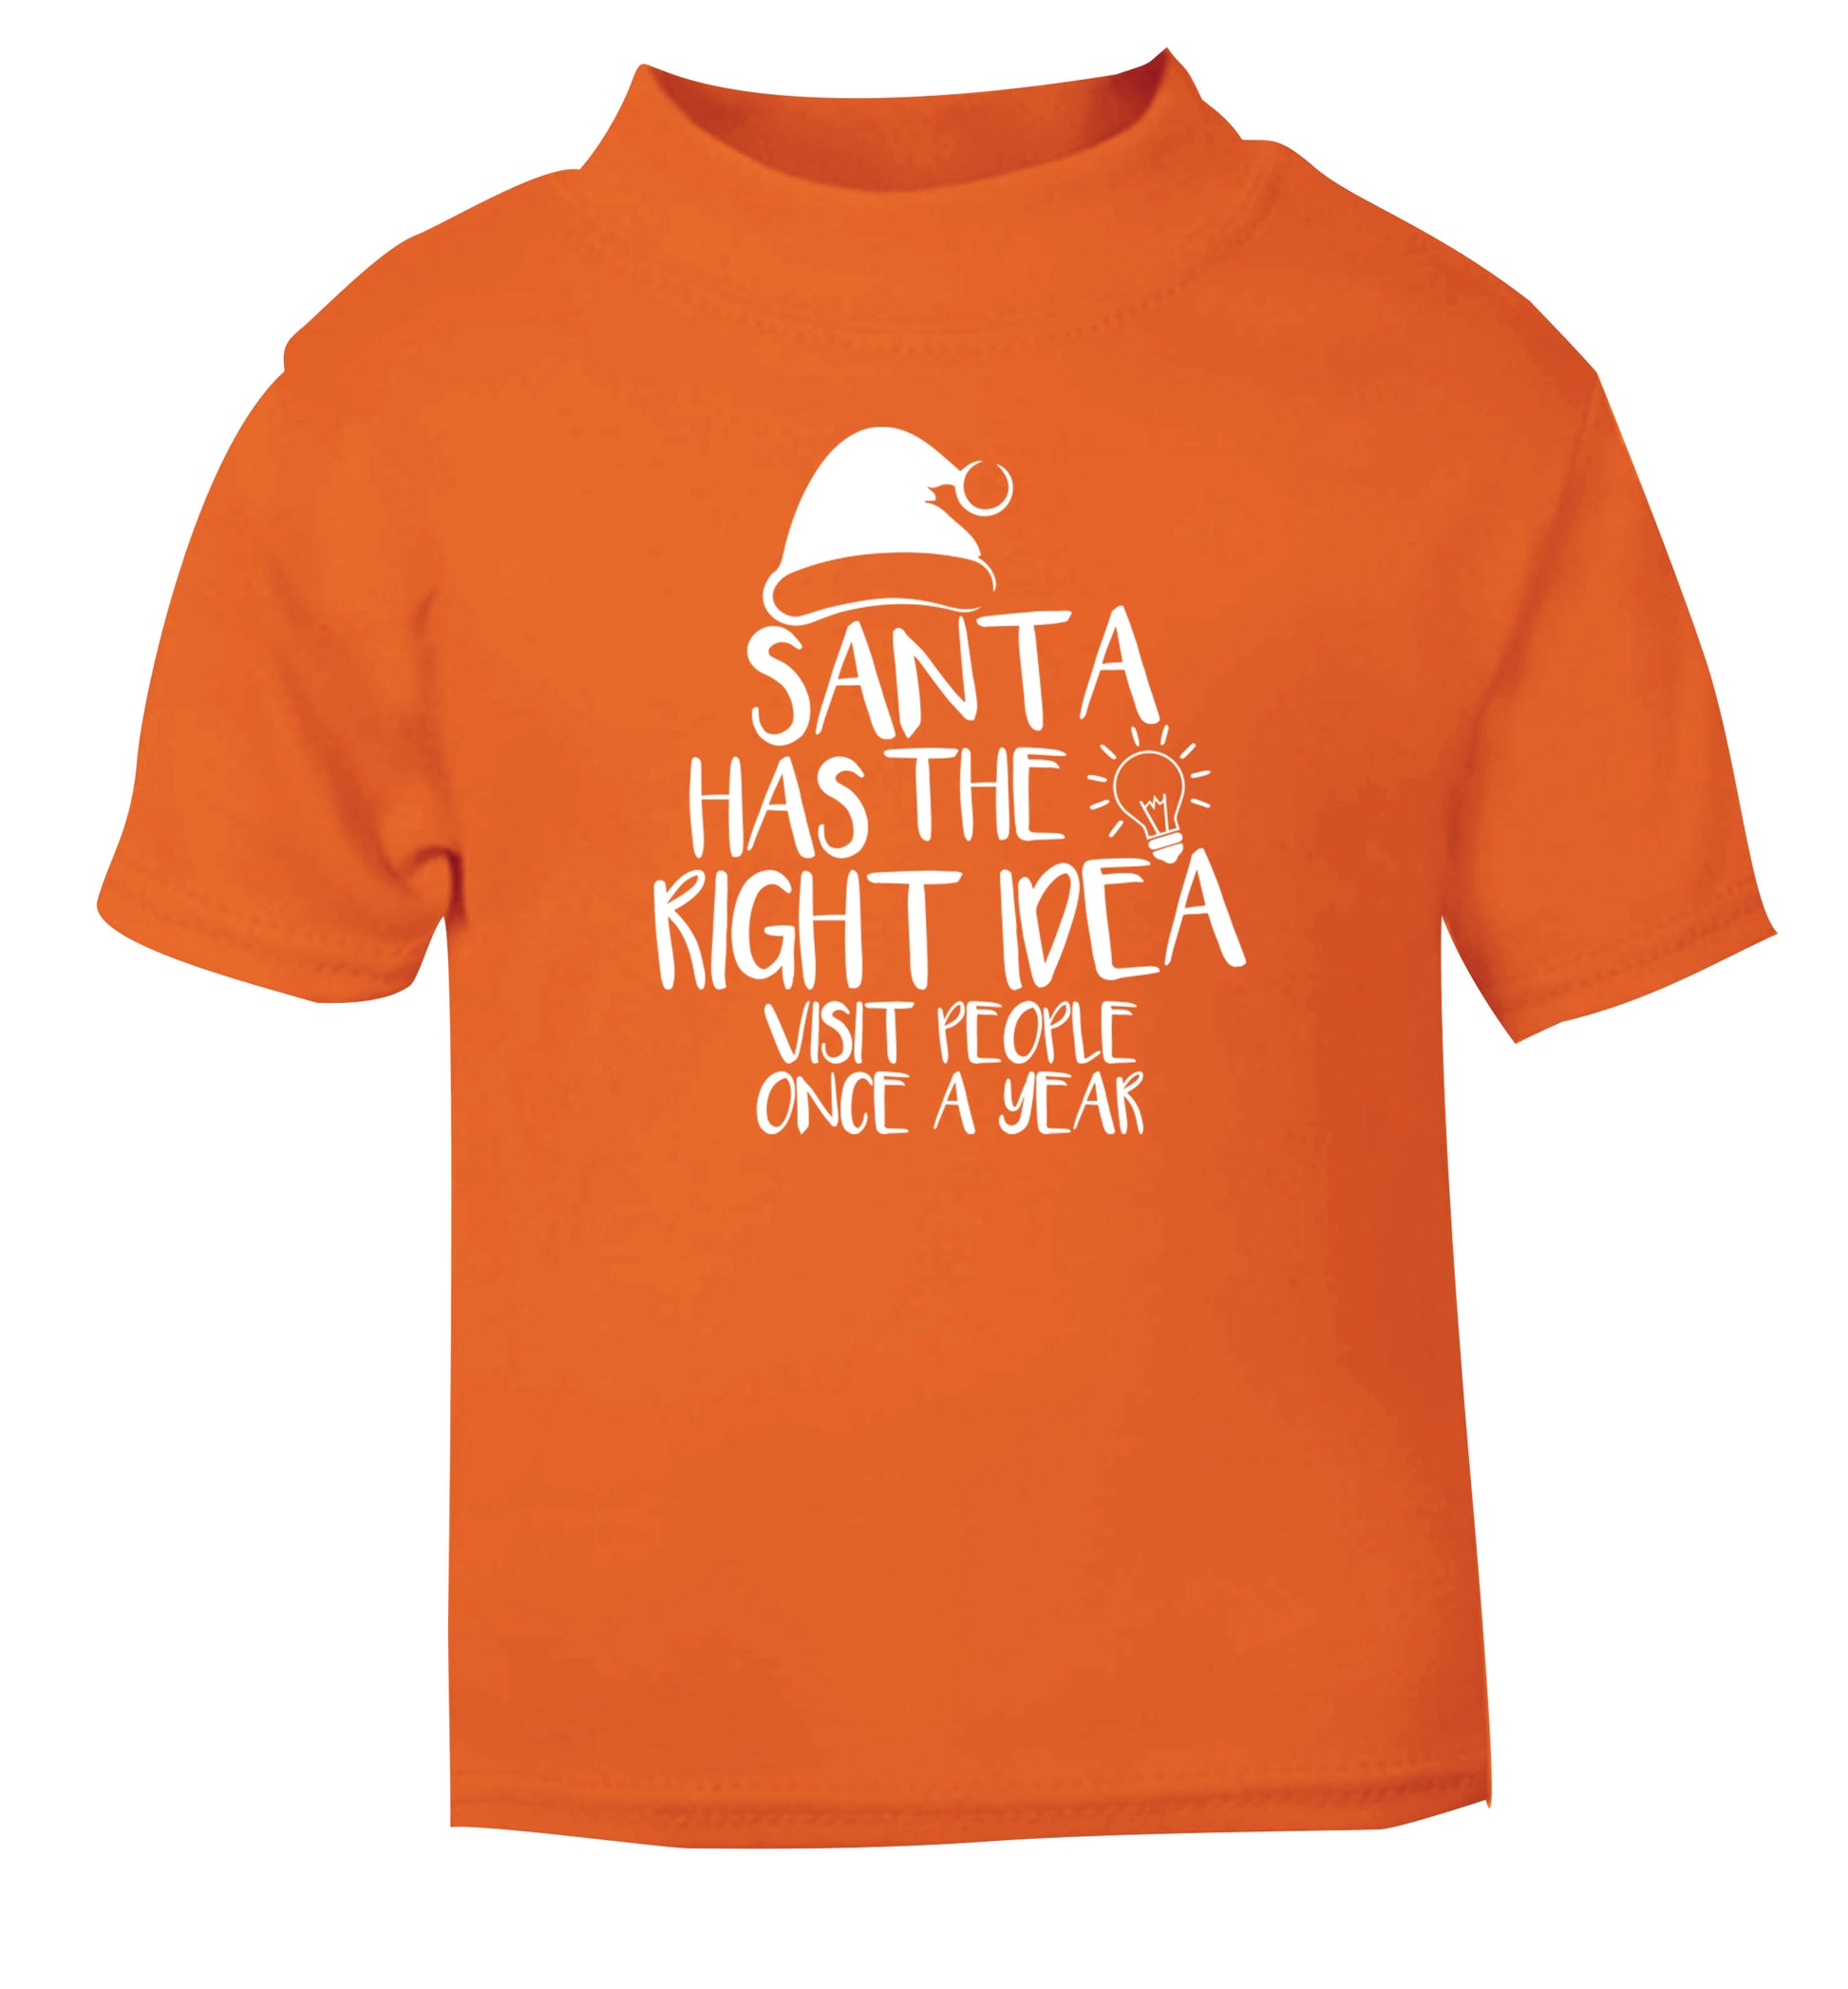 Santa has the right idea visit people once a year orange Baby Toddler Tshirt 2 Years